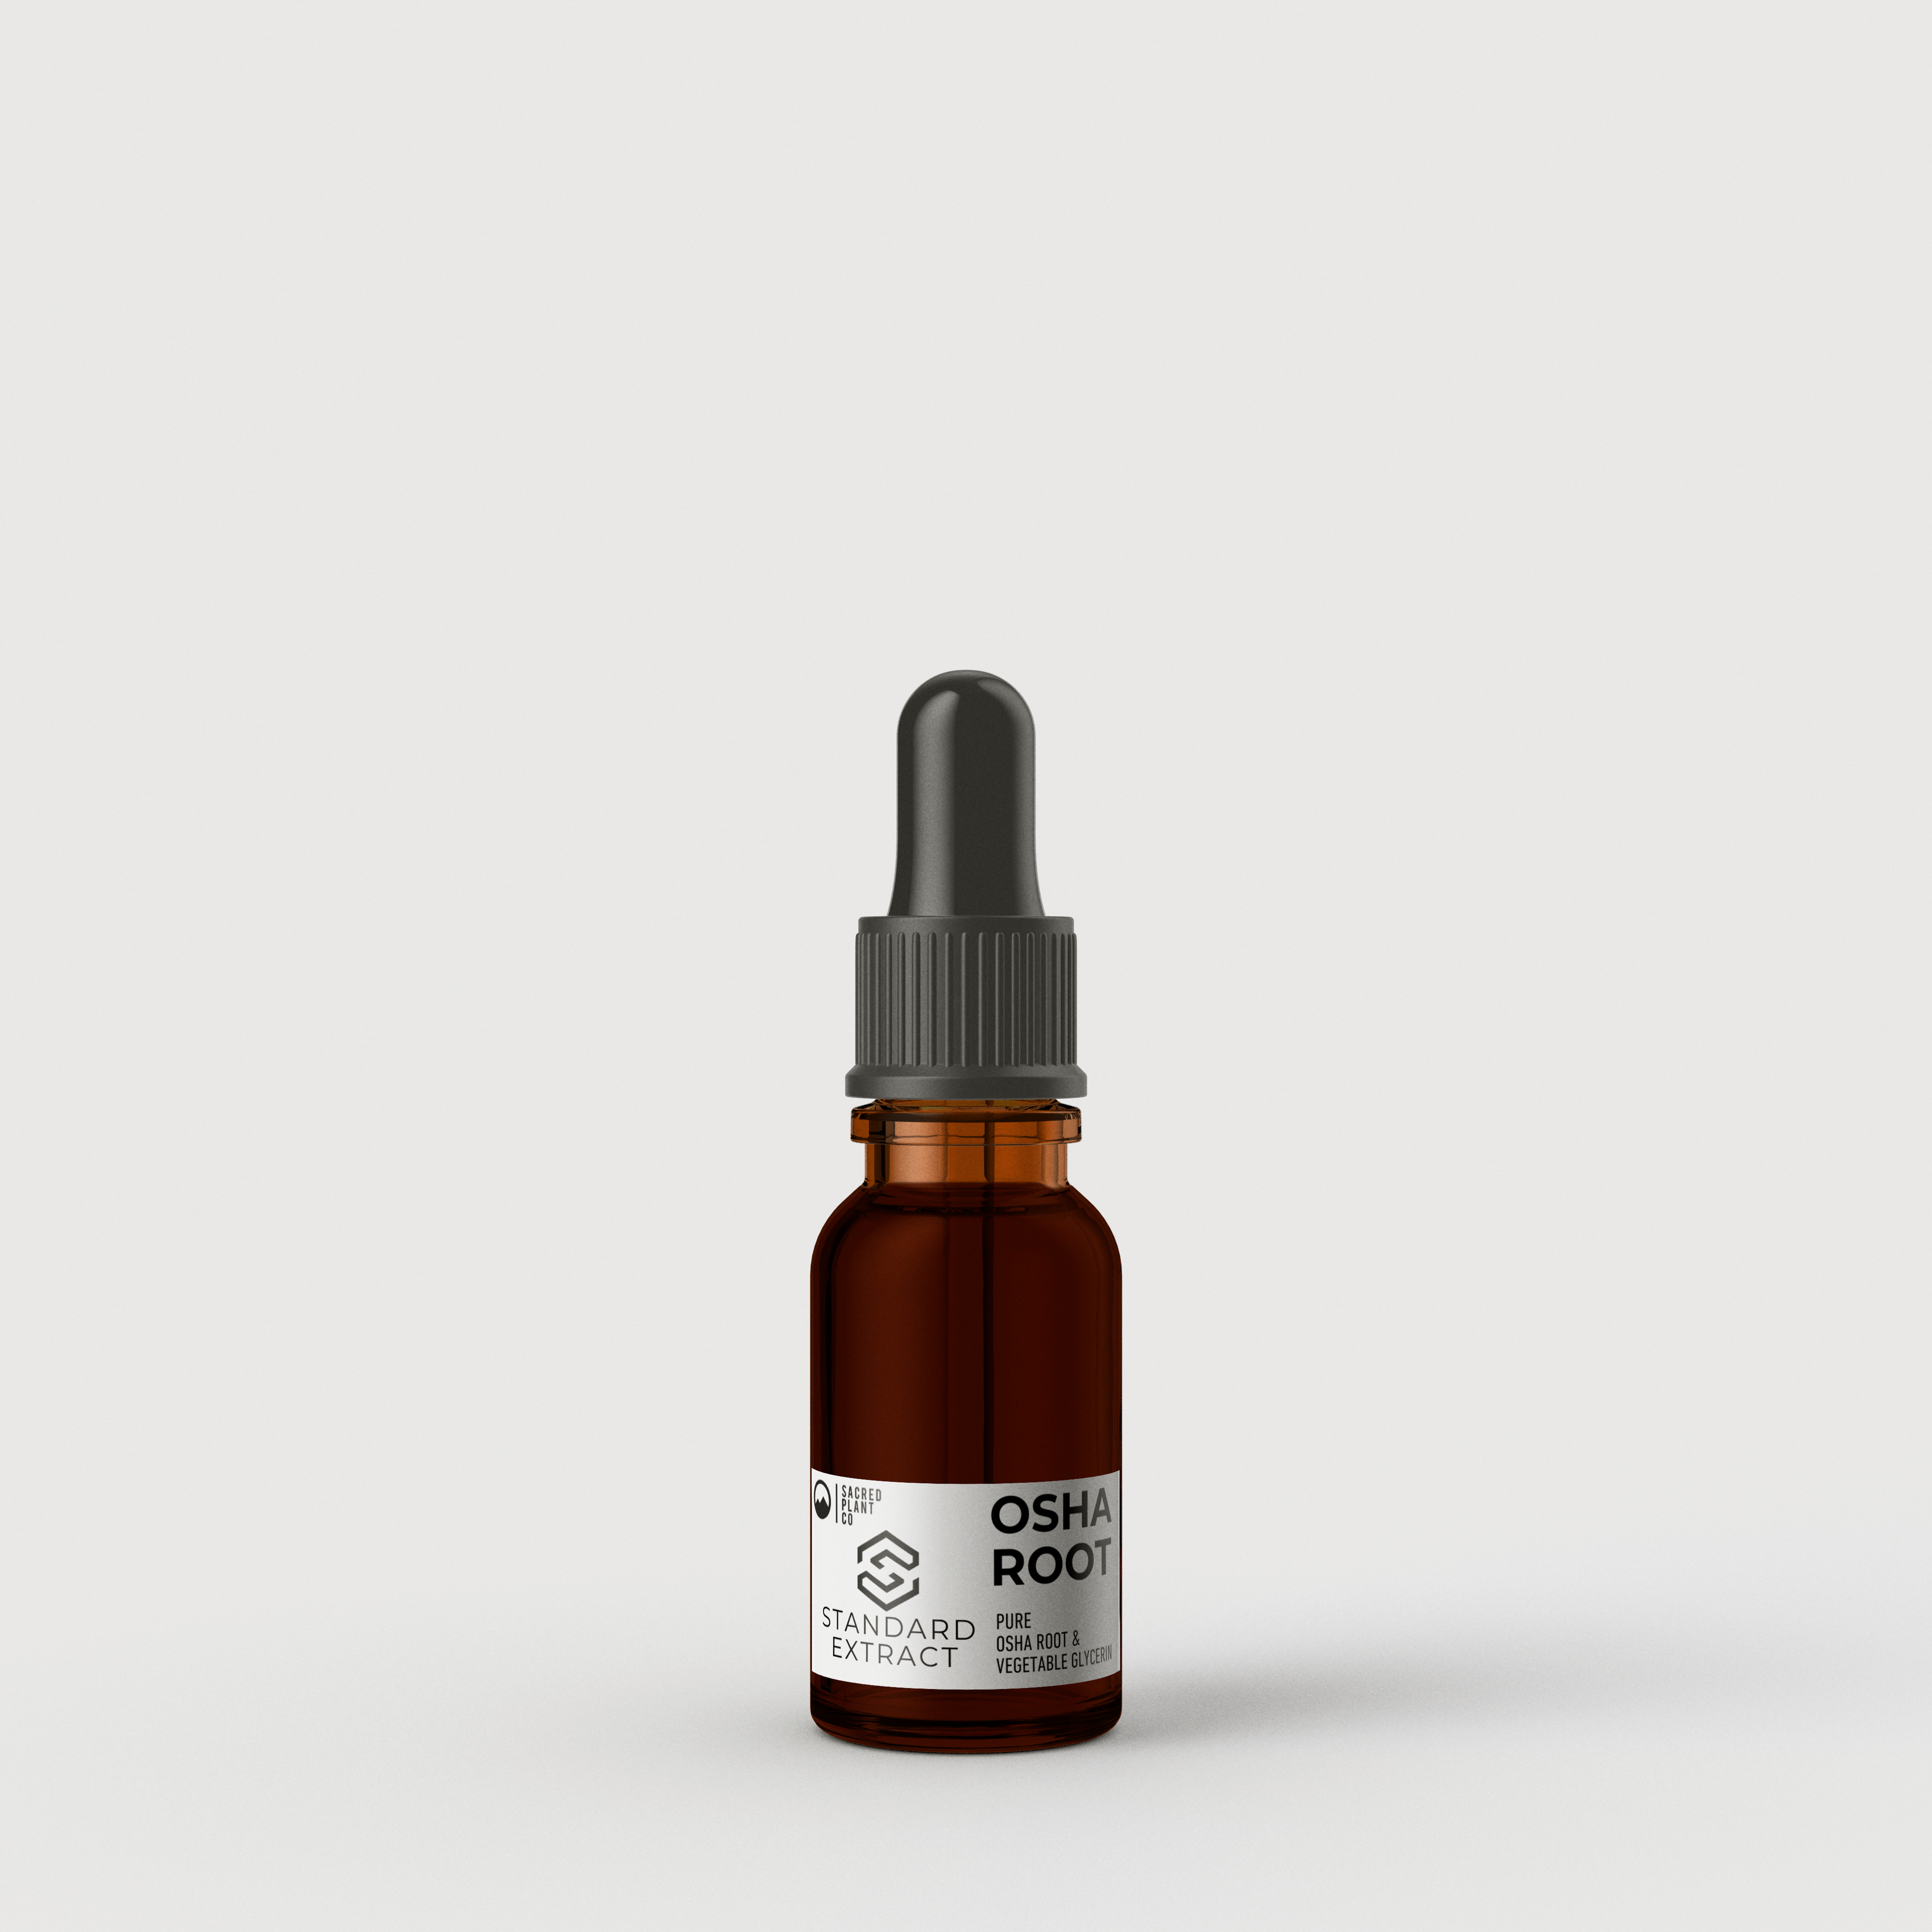 Small dropper bottle of Sacred Plant Co Osha Root Standard Tincture Extract, herbal lung support tincture.